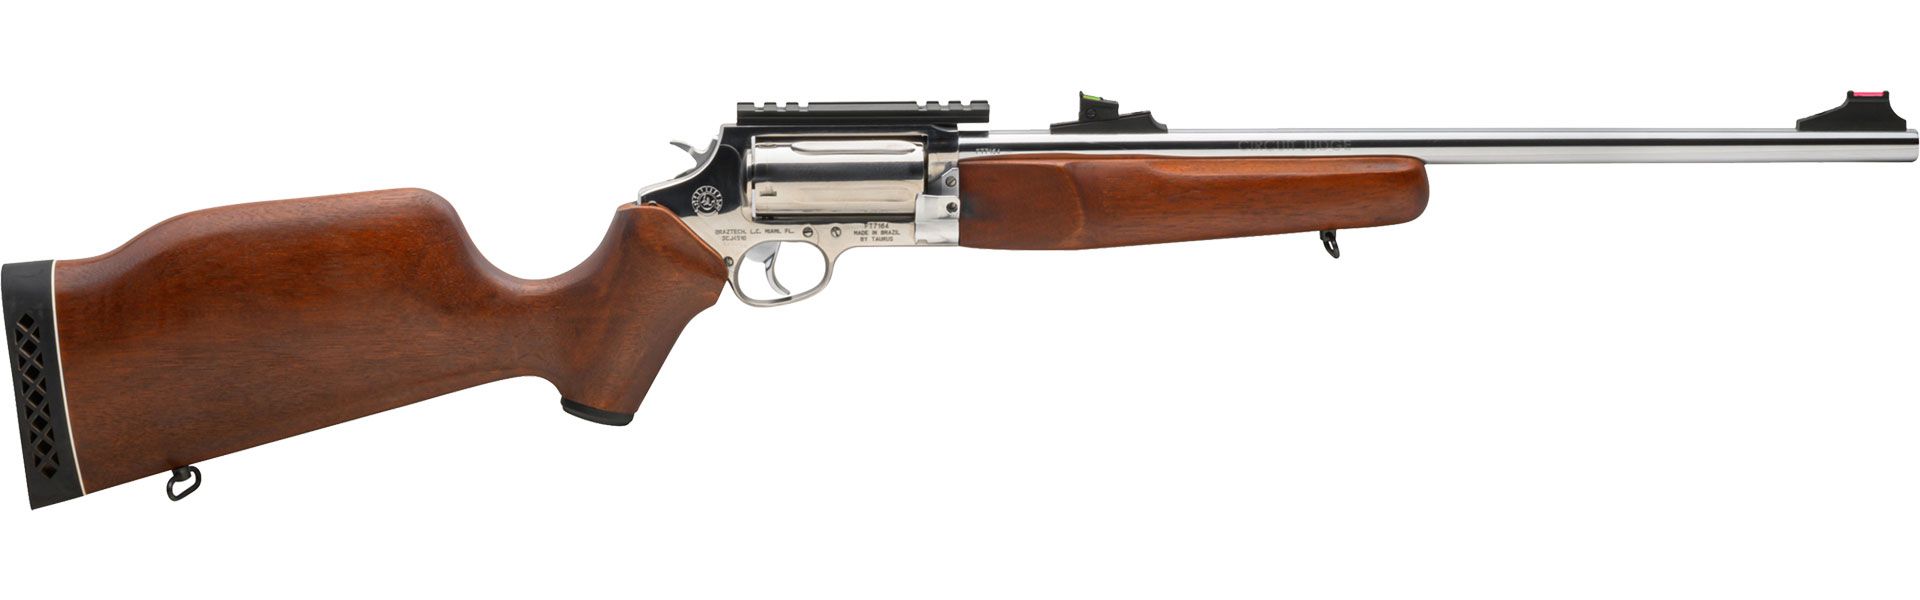 Circuit Judge Hardwood, .45 COLT/410 Bore, Stainless Steel, 18 in.